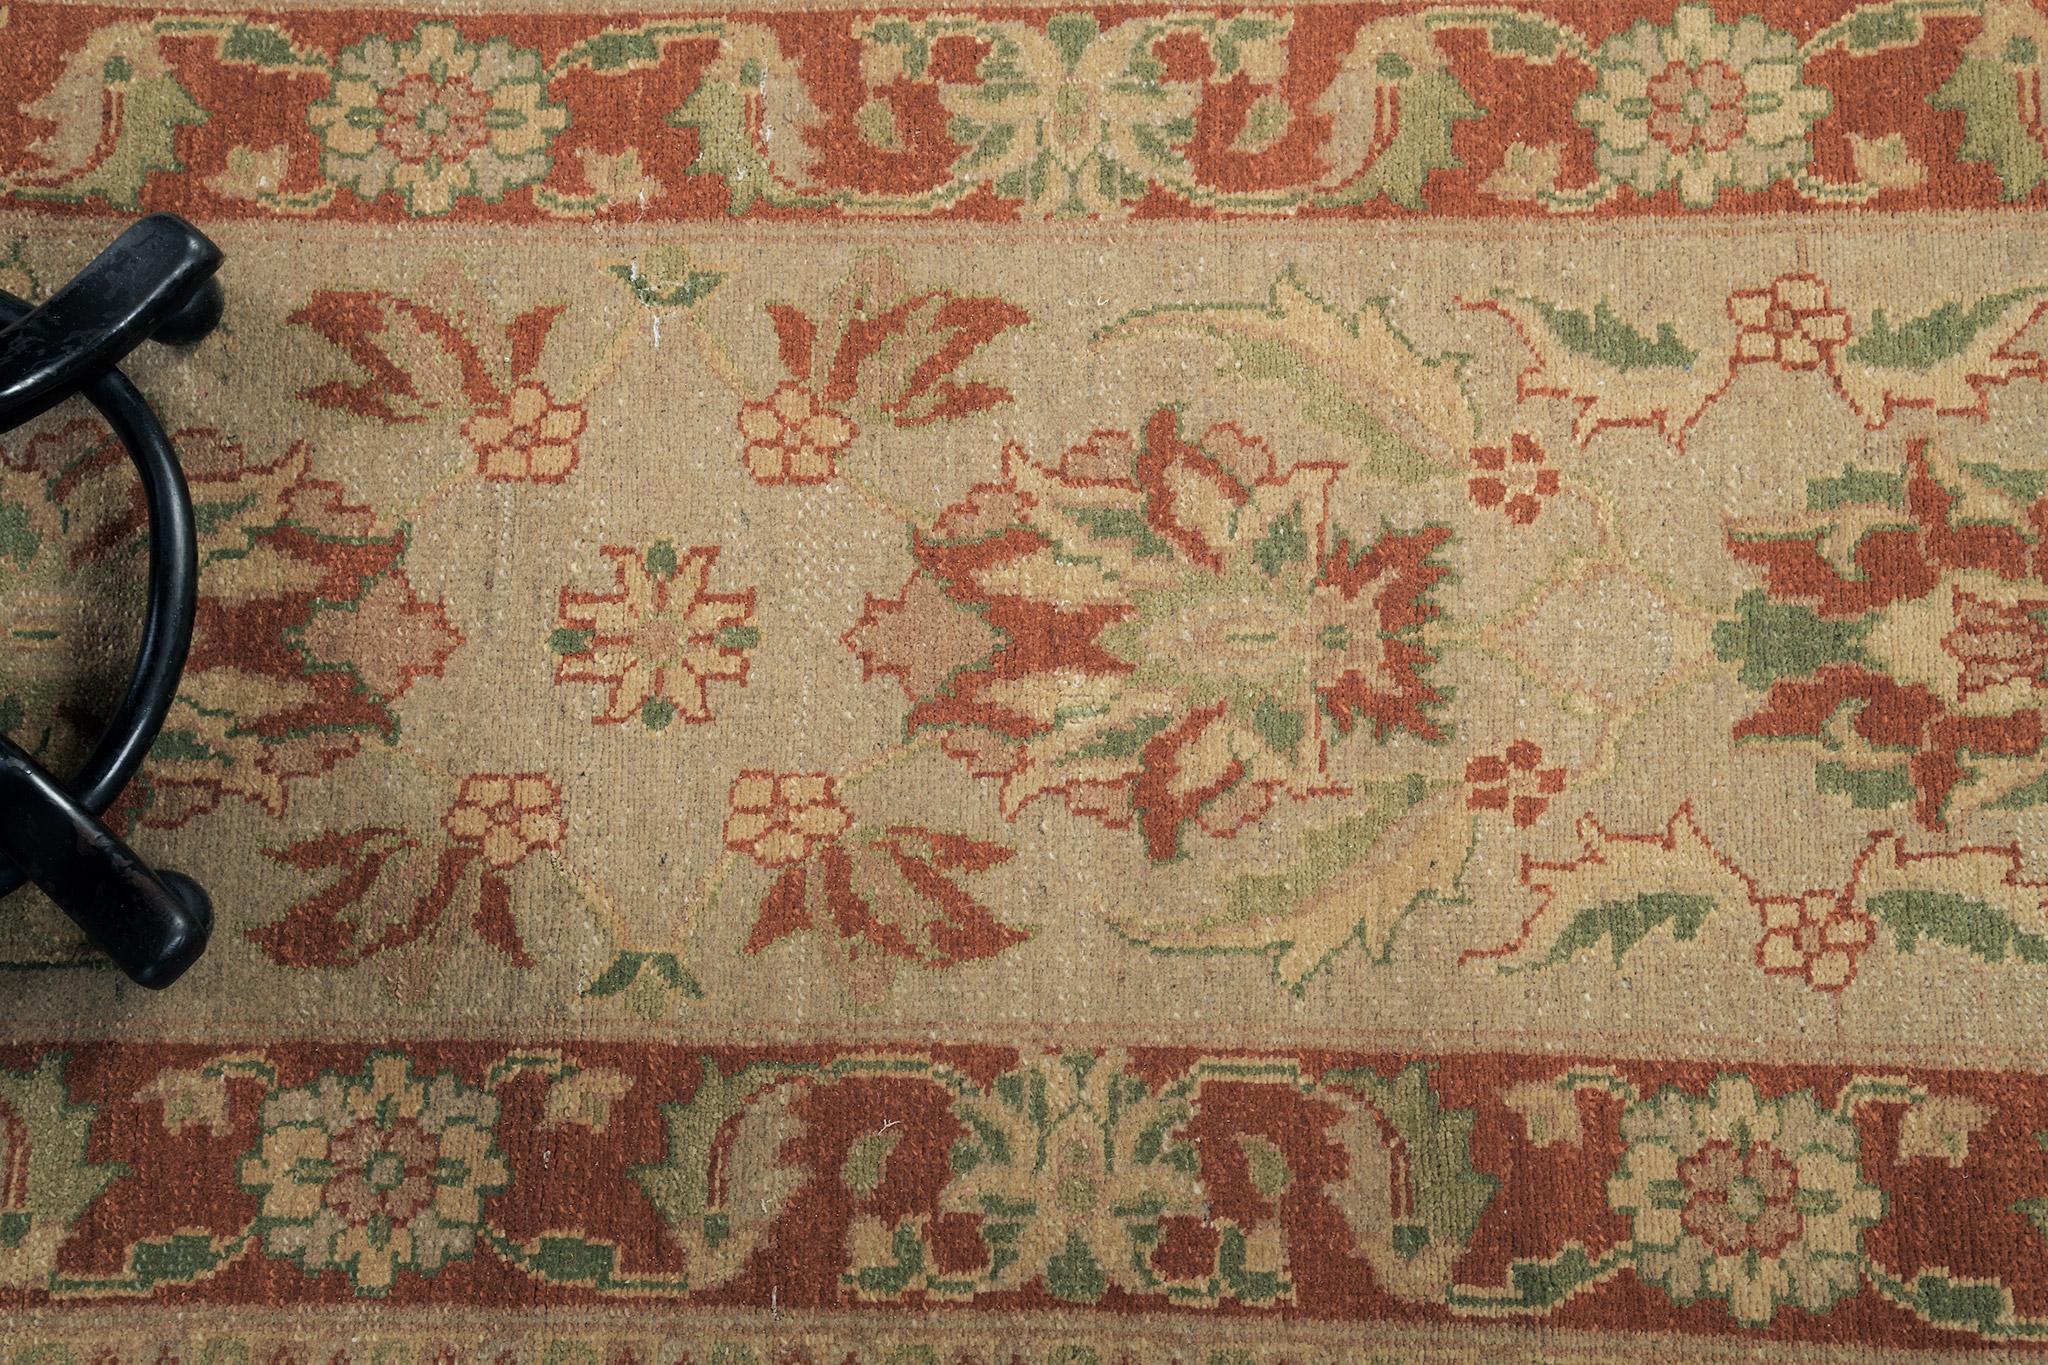 Mehraban Natural Dye Sultanabad Design Runner Divine In New Condition For Sale In WEST HOLLYWOOD, CA